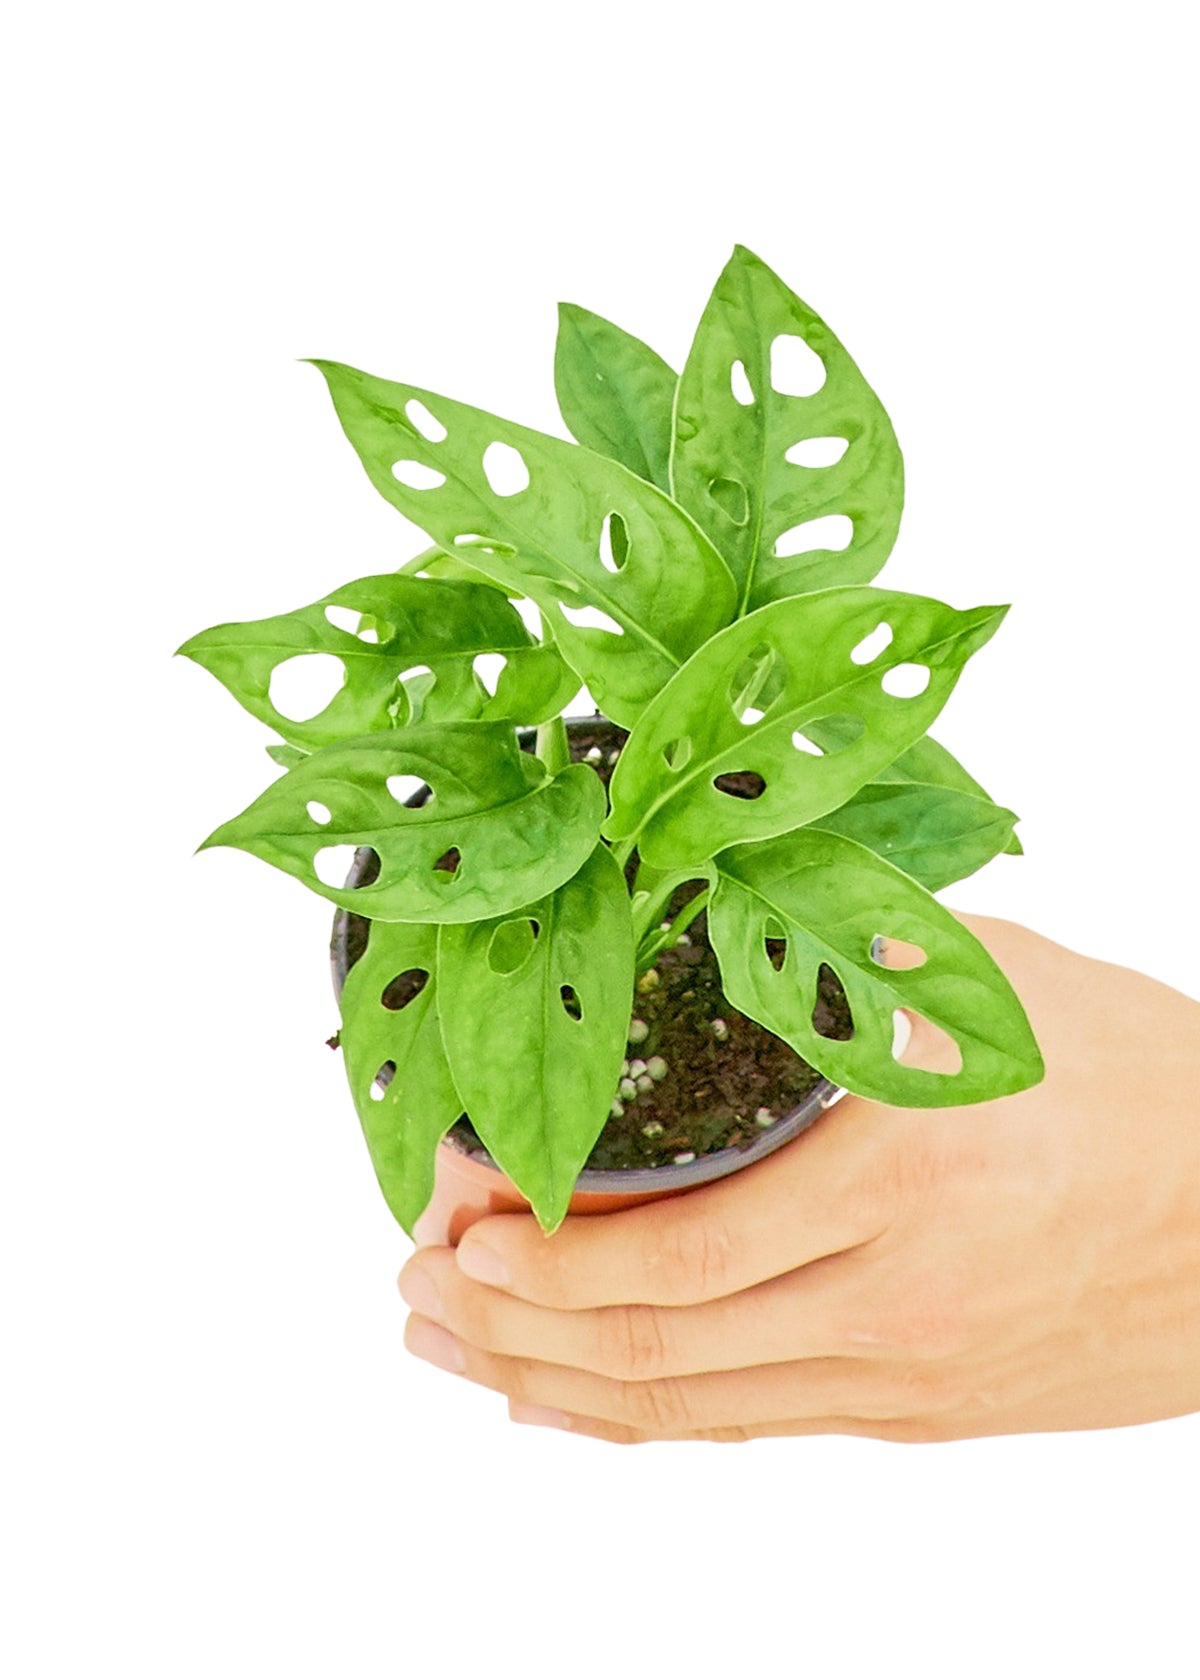 Small size Swiss Cheese Vine Plant in a growers pot with a white background with a hand holding the pot showing the top view